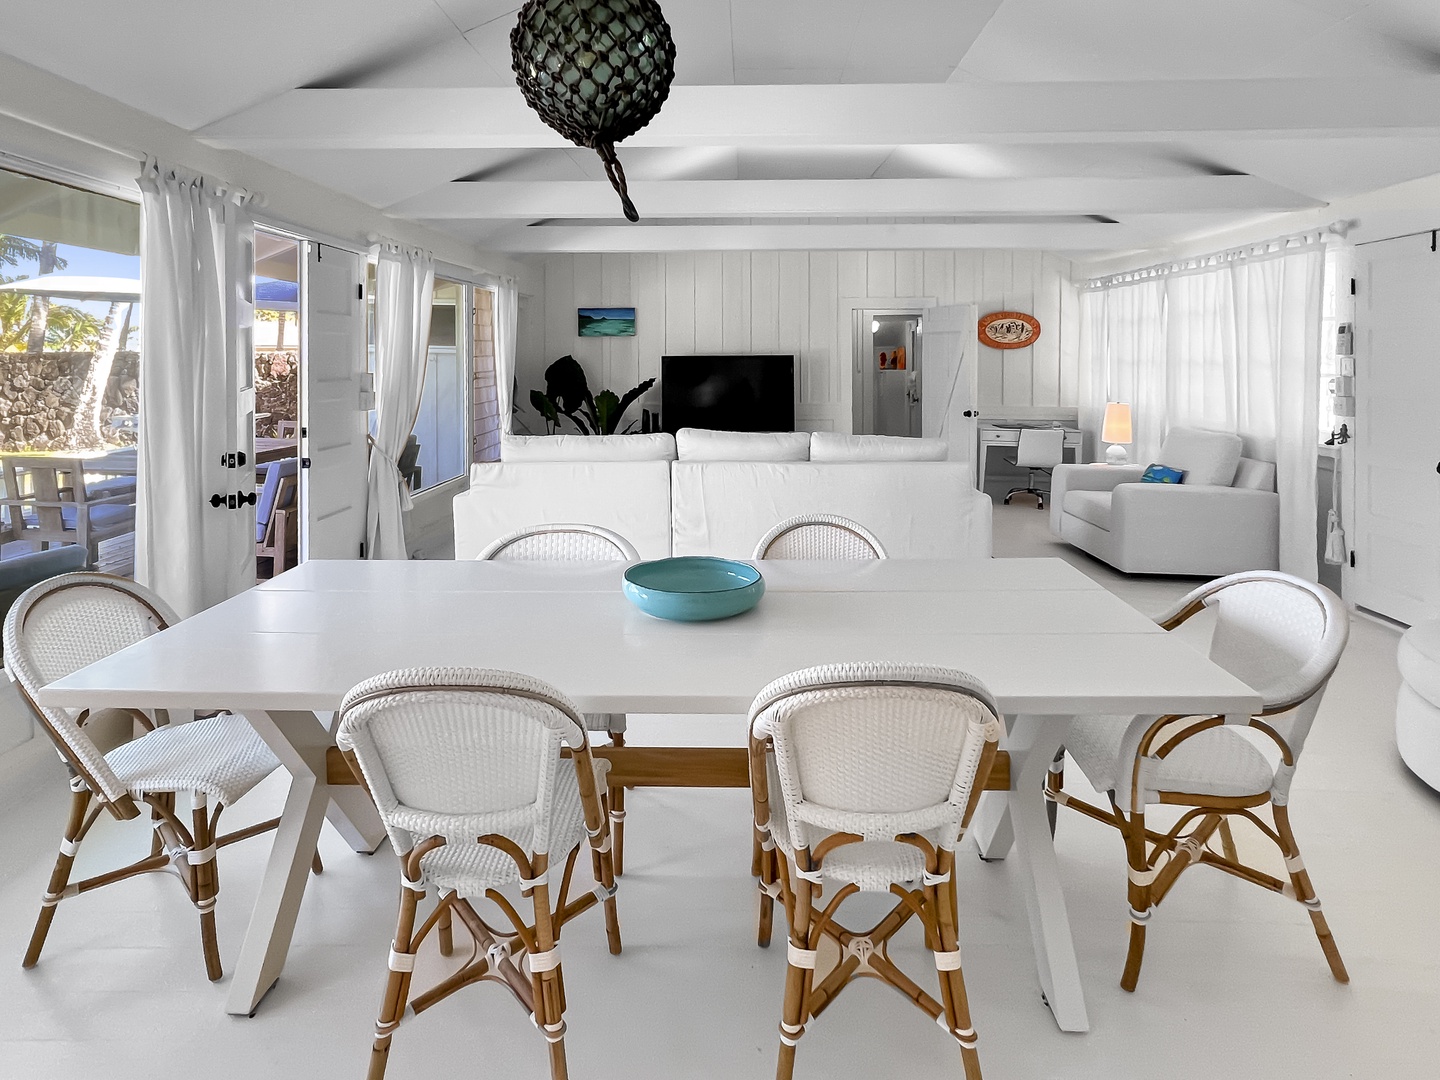 Kailua Vacation Rentals, Kai Mele - Tv space and dining space blend in a beautiful and bright open concept style